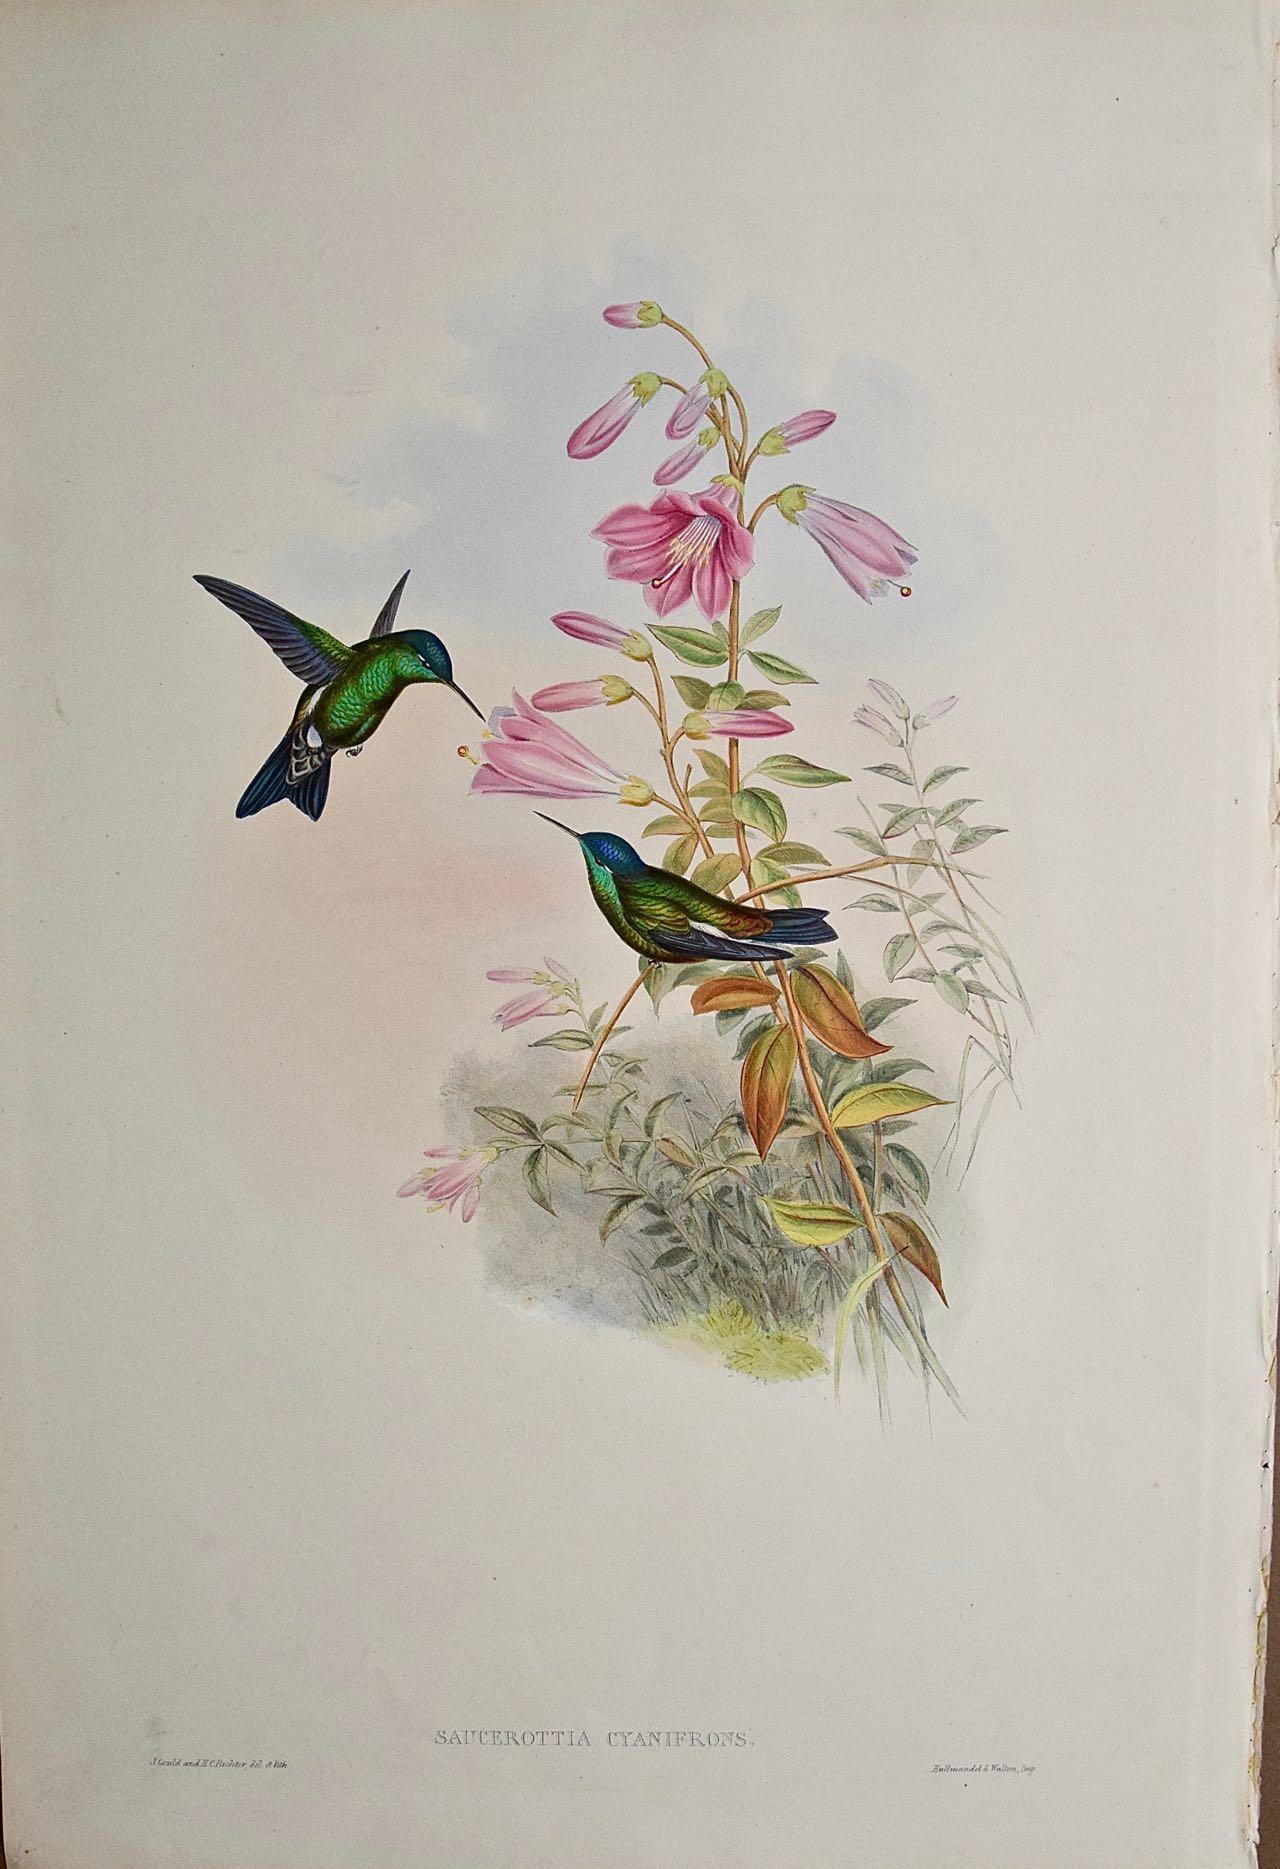 Hummingbirds: 19th C. Gould Hand-colored "Cyanifrons", Blue-capped Saucerottia 